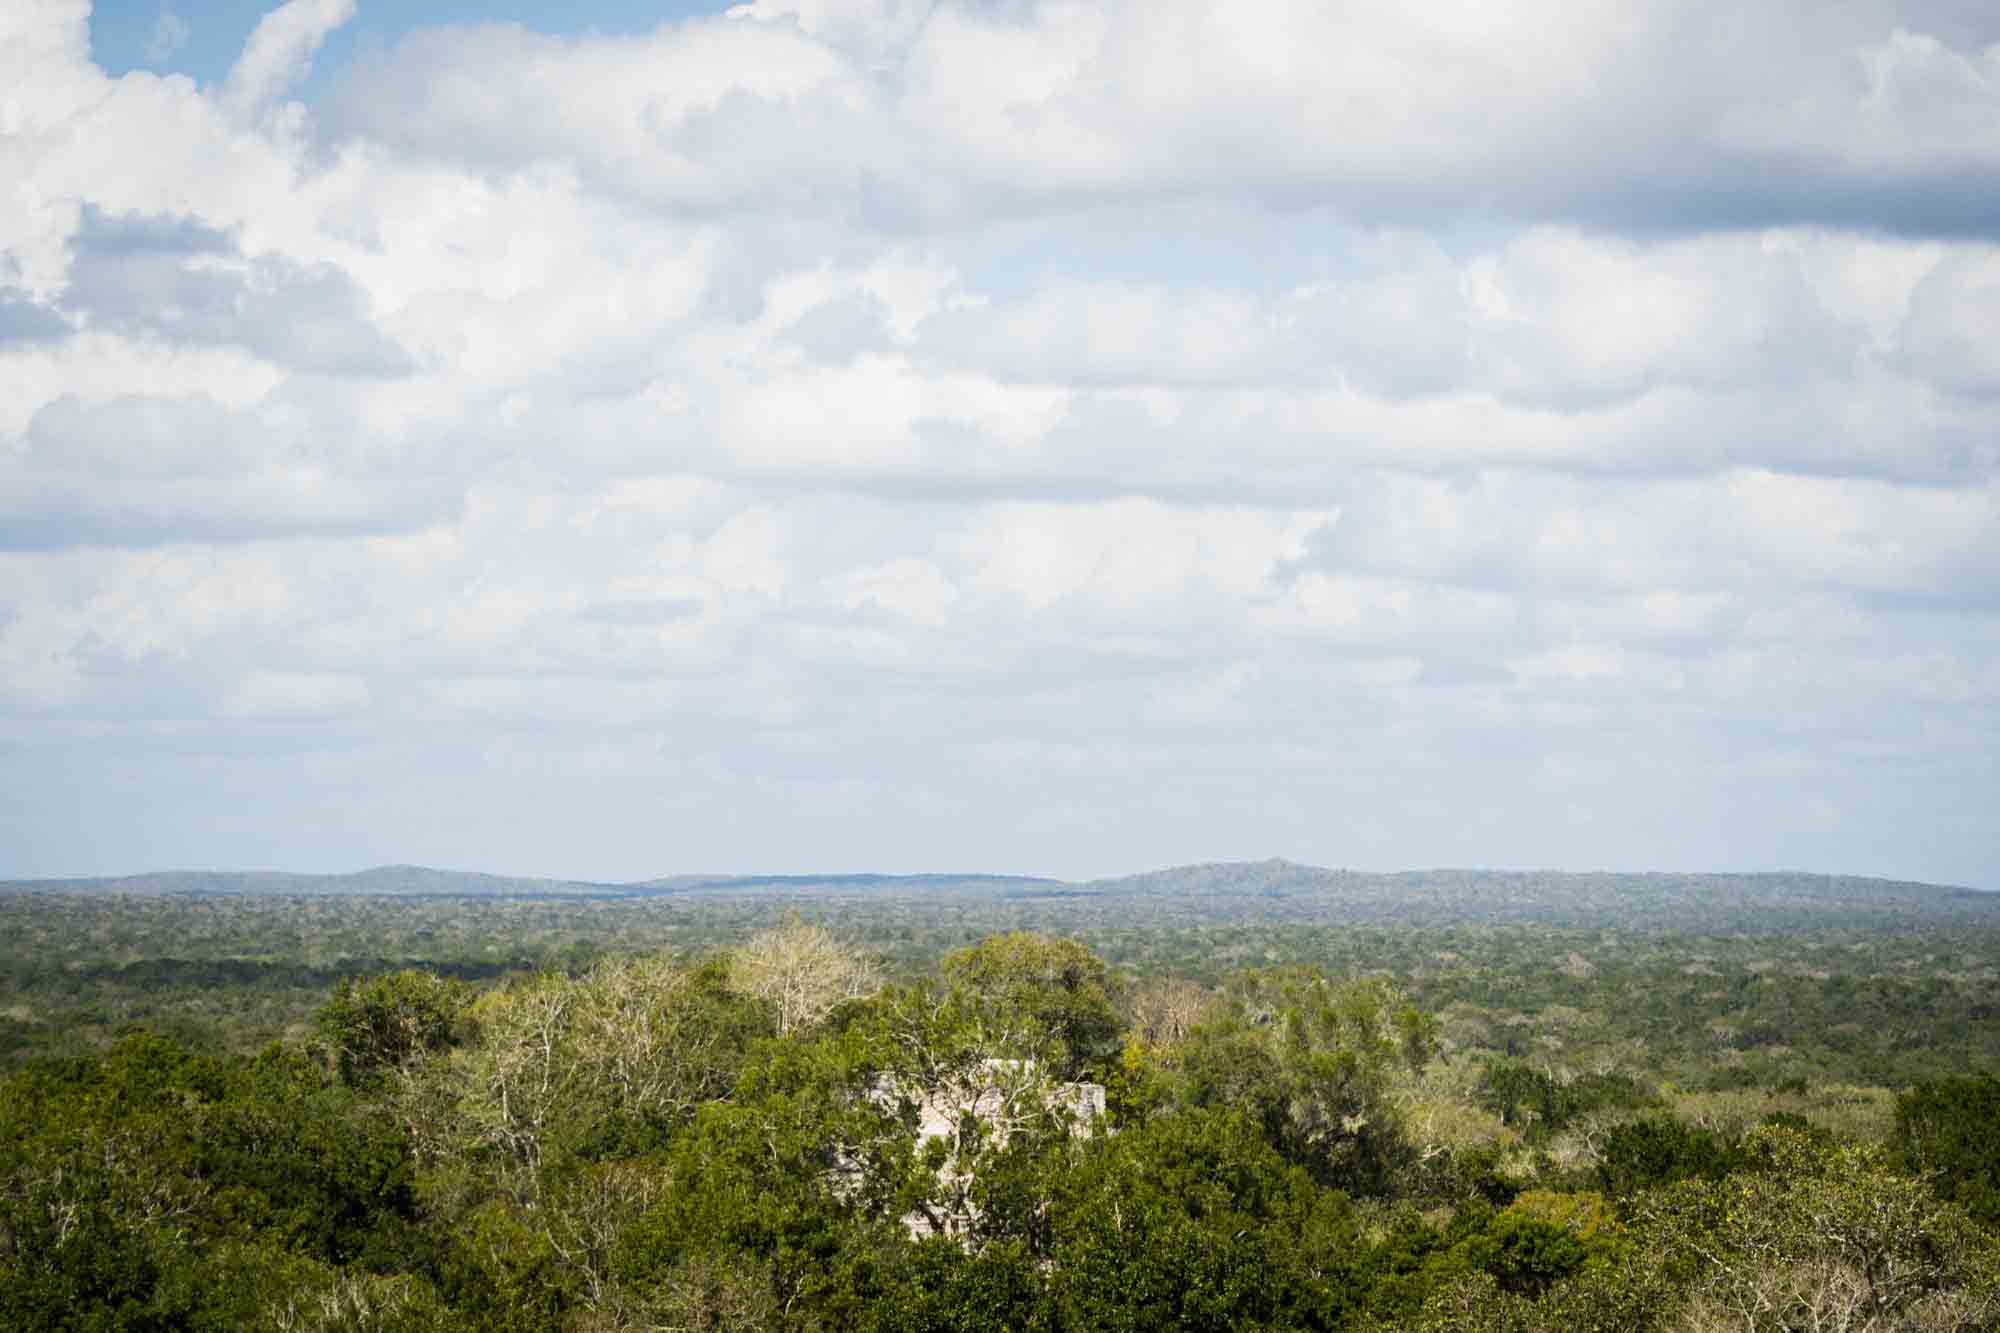 View of the treetops and clouds from a pyramid in Calakmul